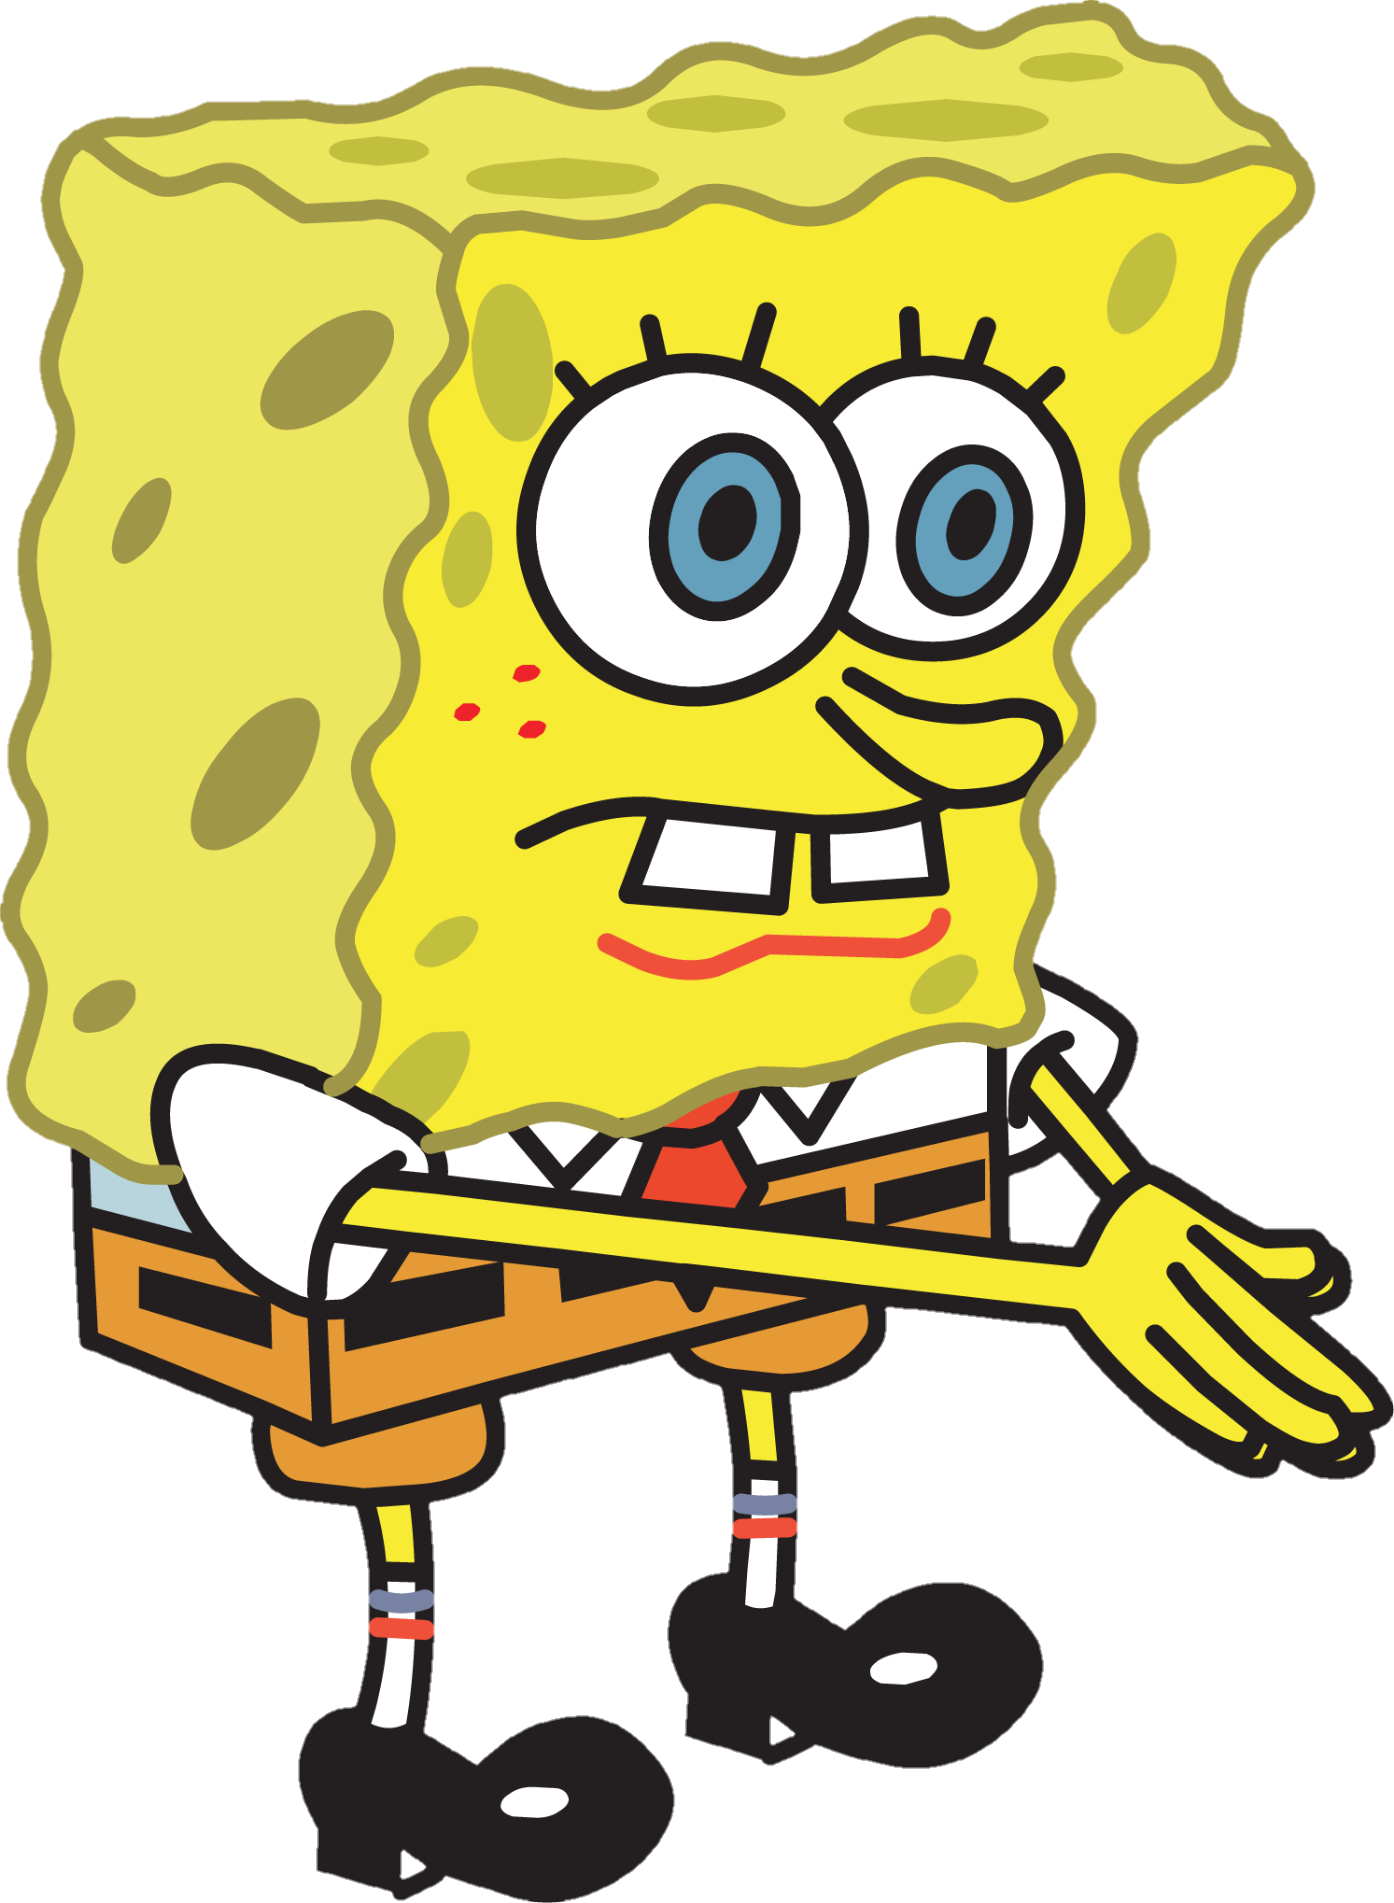 spongebob-png-image-from-pngfre-53